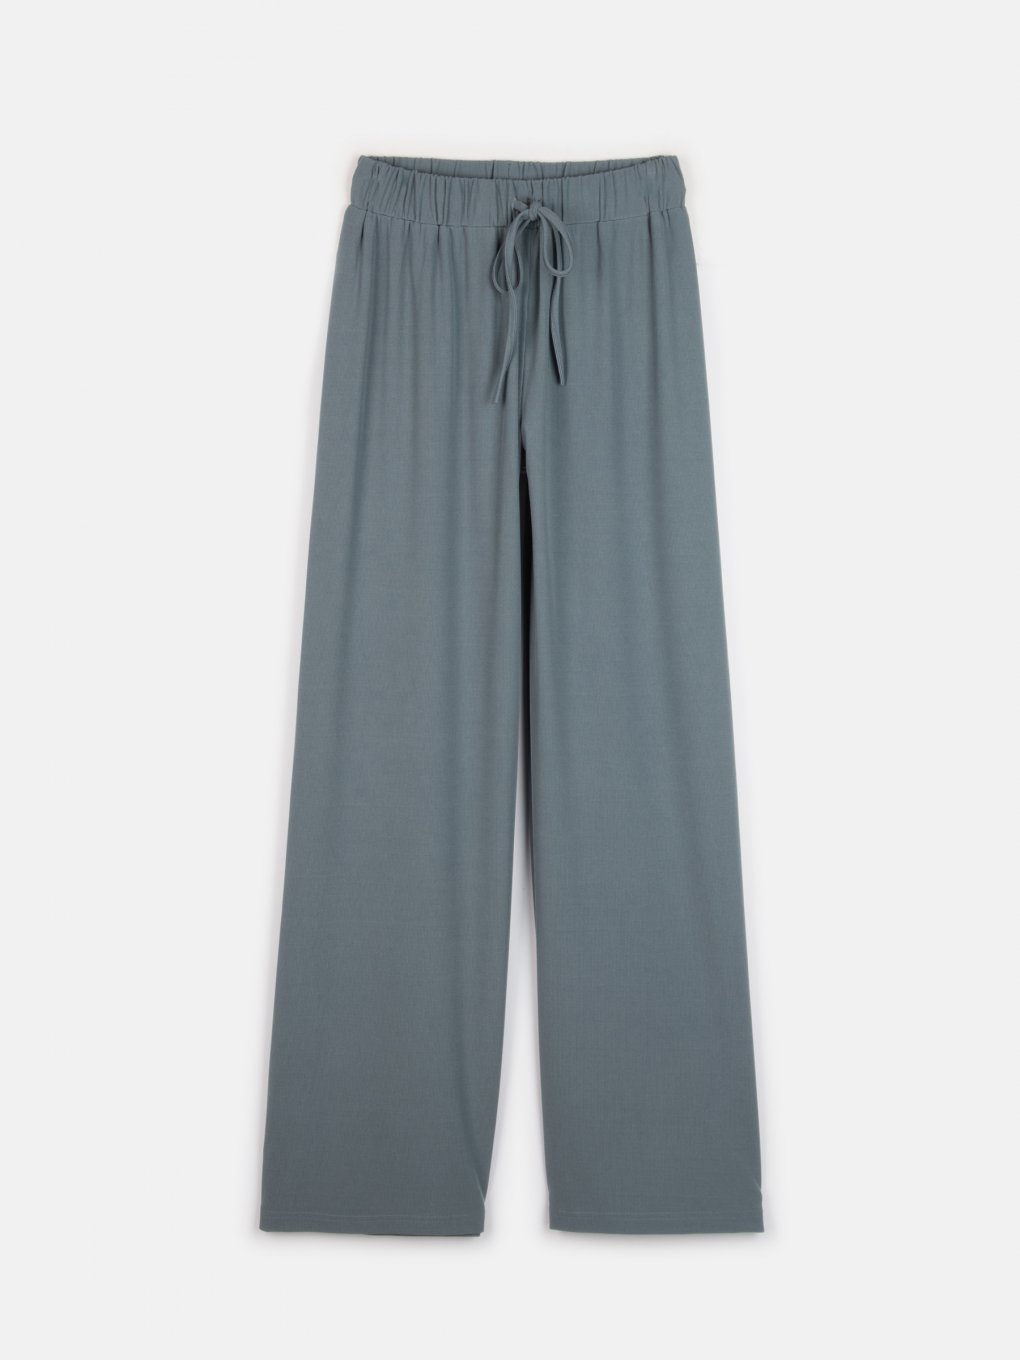 Ribbed wide pants with elastic waistband